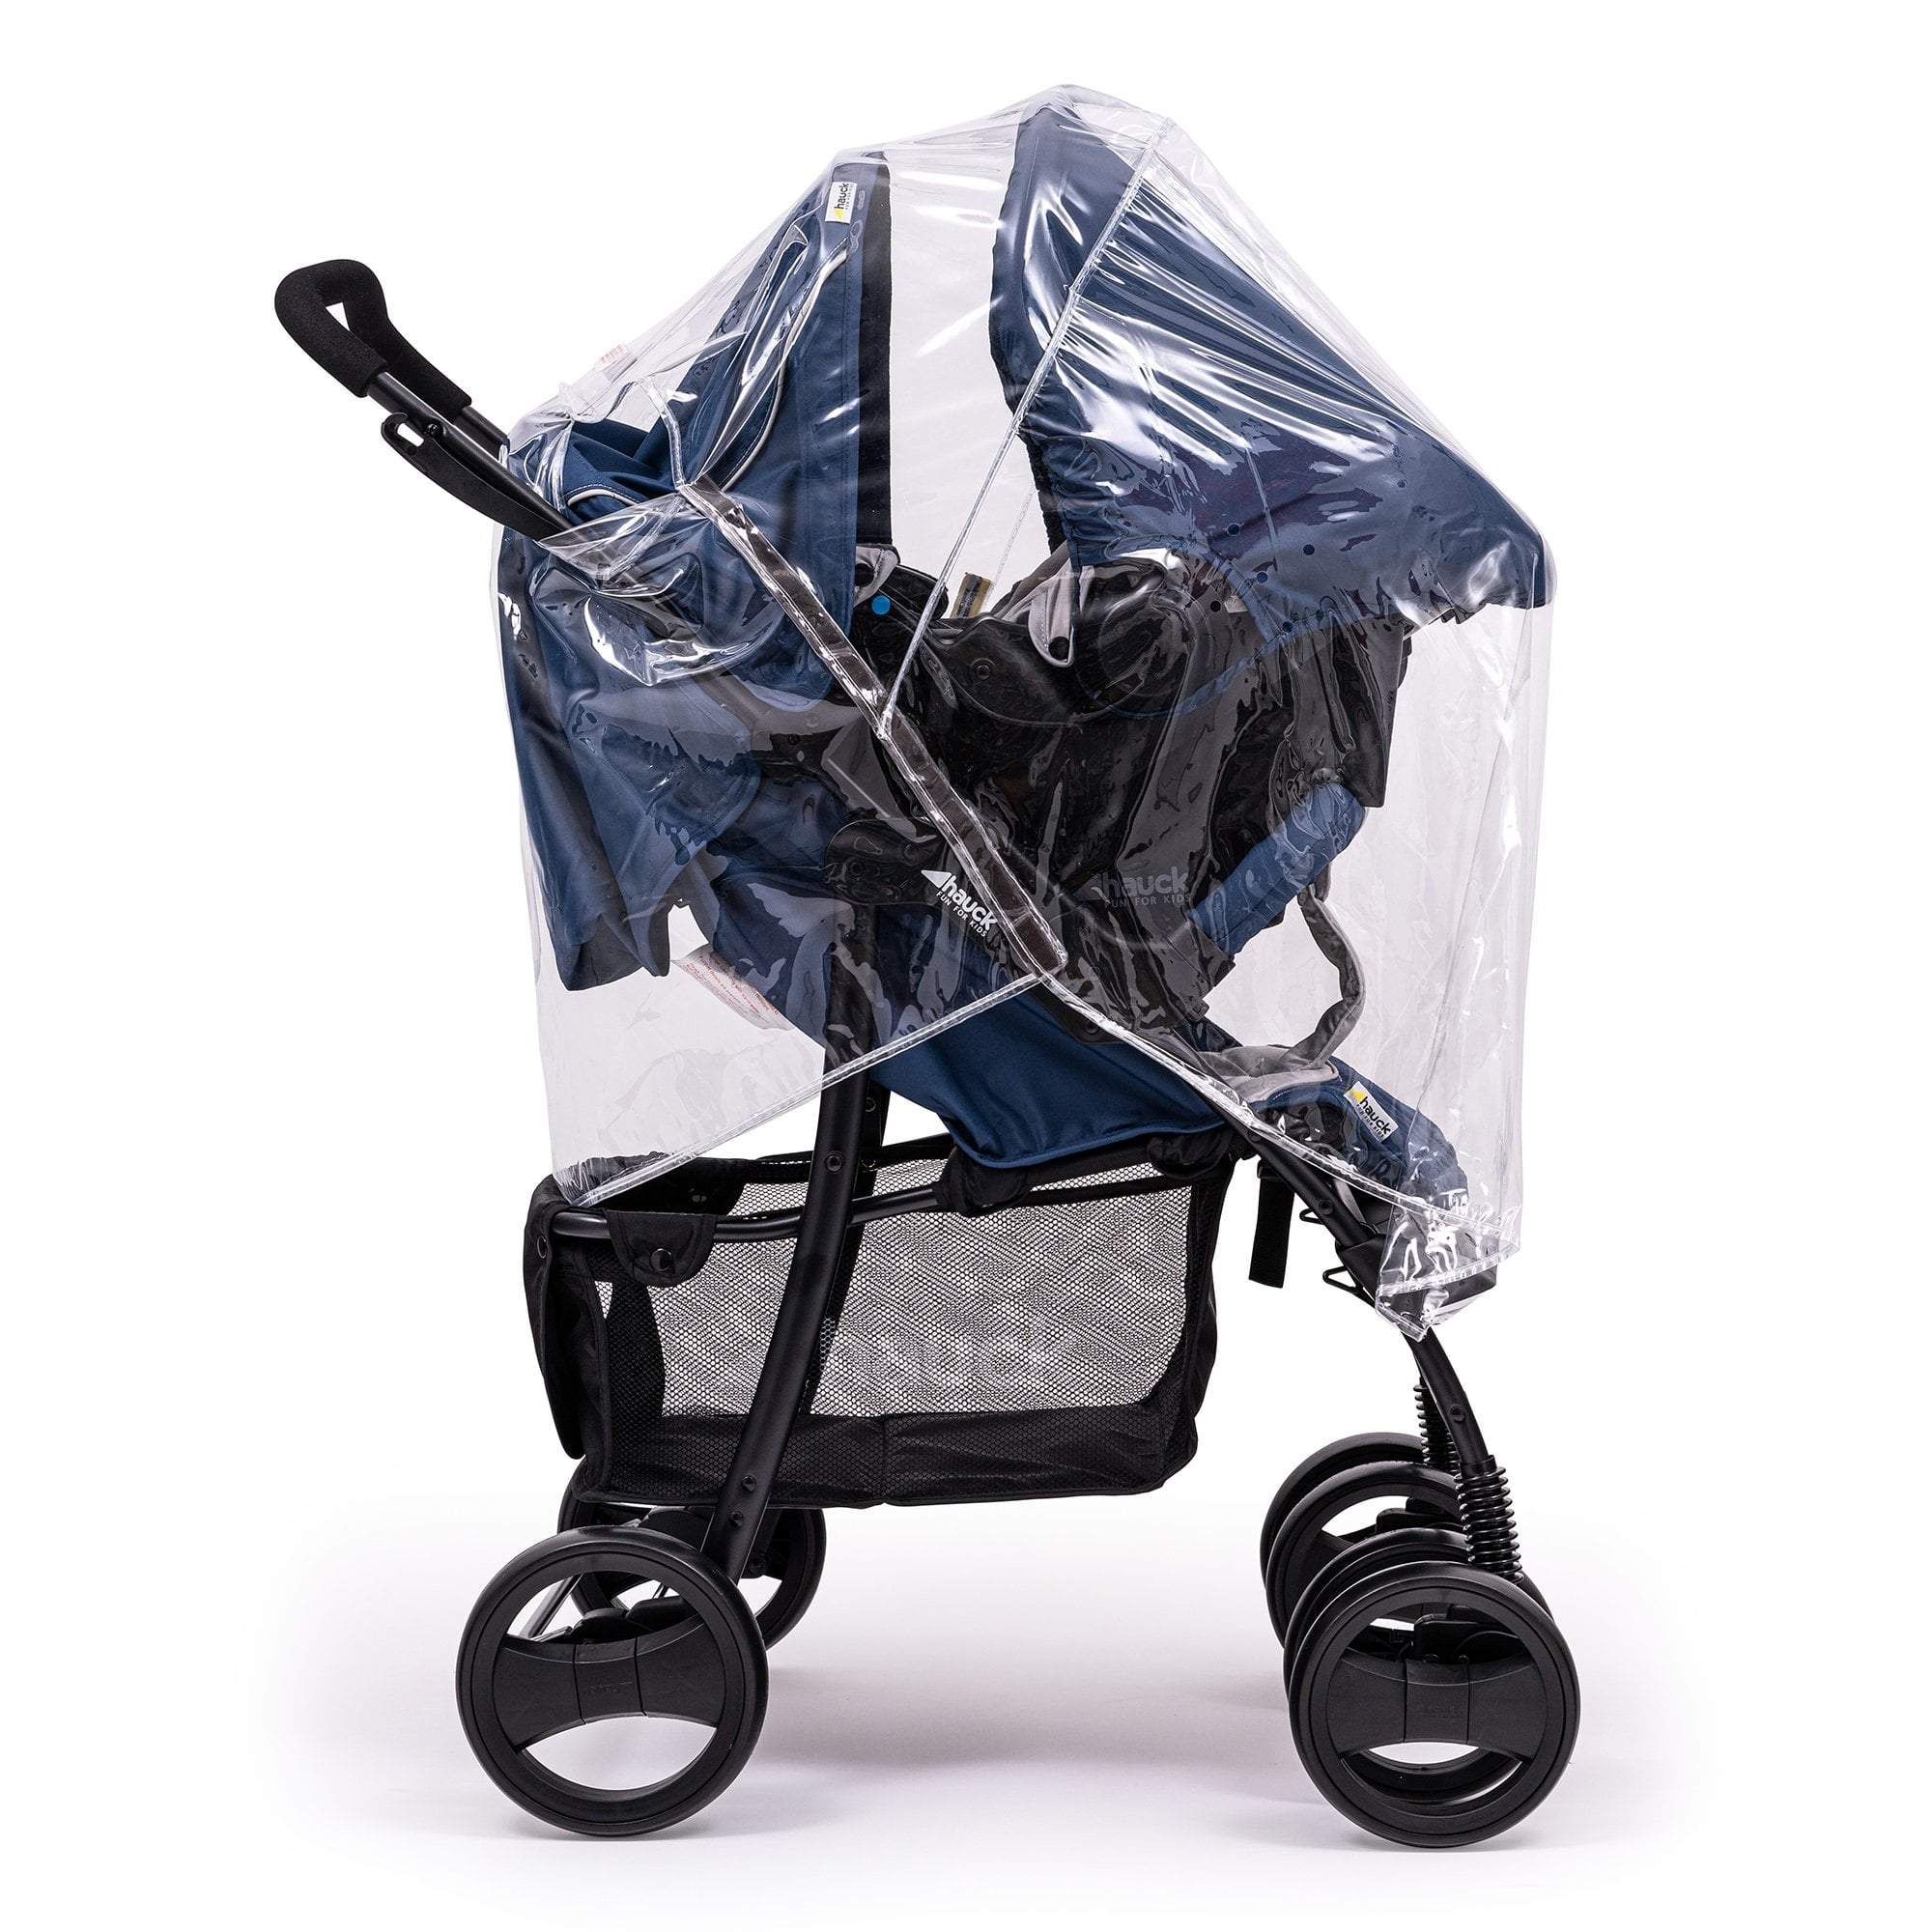 Travel System Raincover Compatible with Excel - Fits All Models - For Your Little One